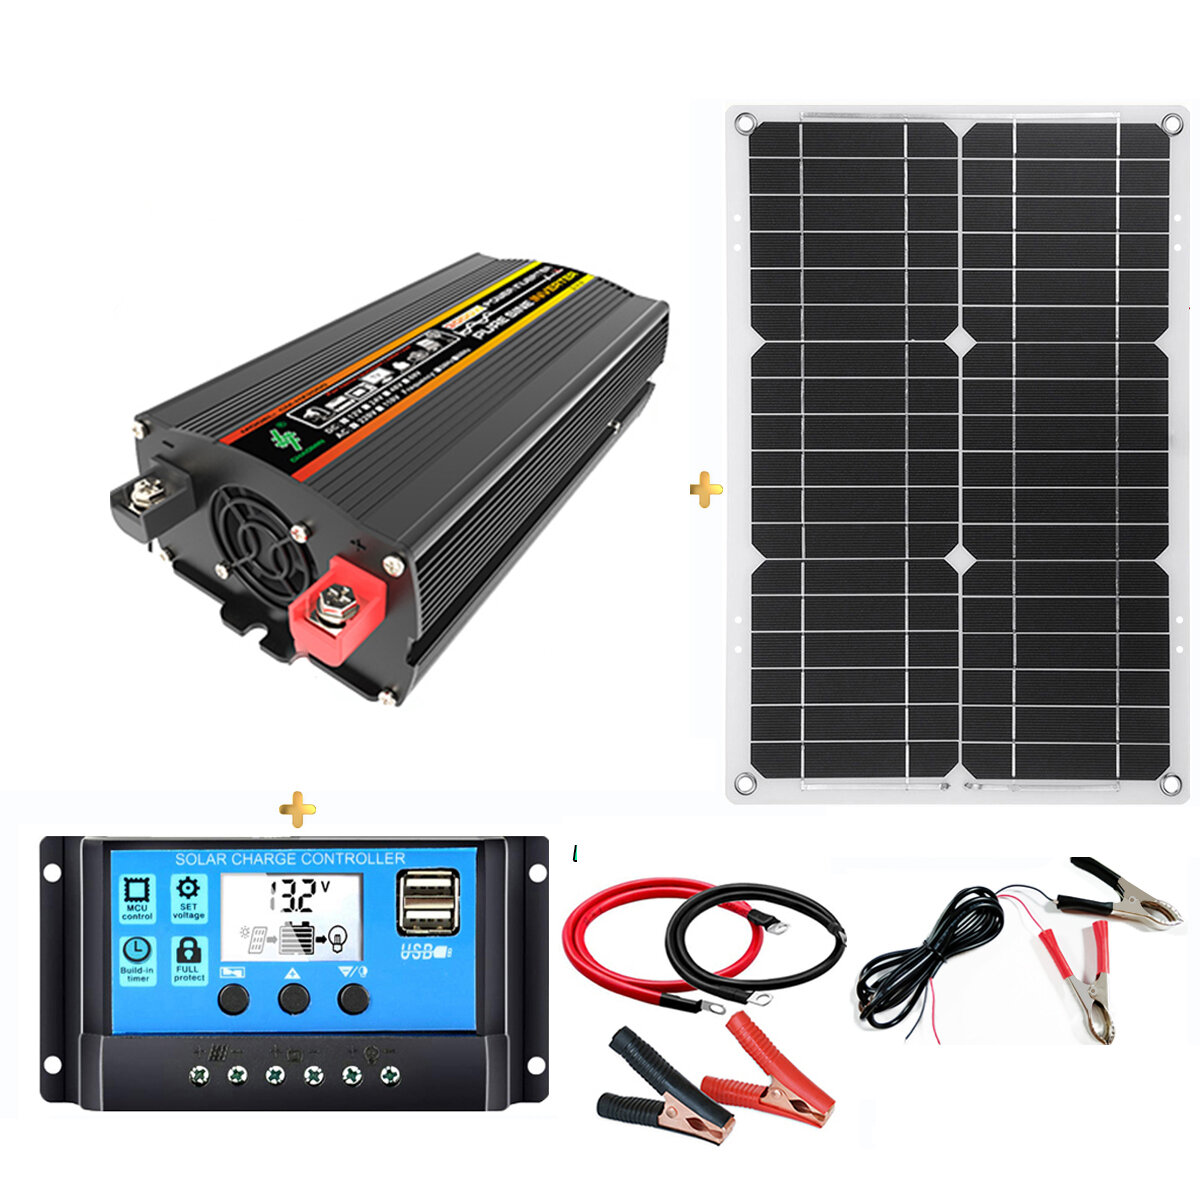 

8000W Solar Inverter Kit Solar Power System With 18W Solar Panel 30A Solar Controller for Camping RV Travel Hunting Fish